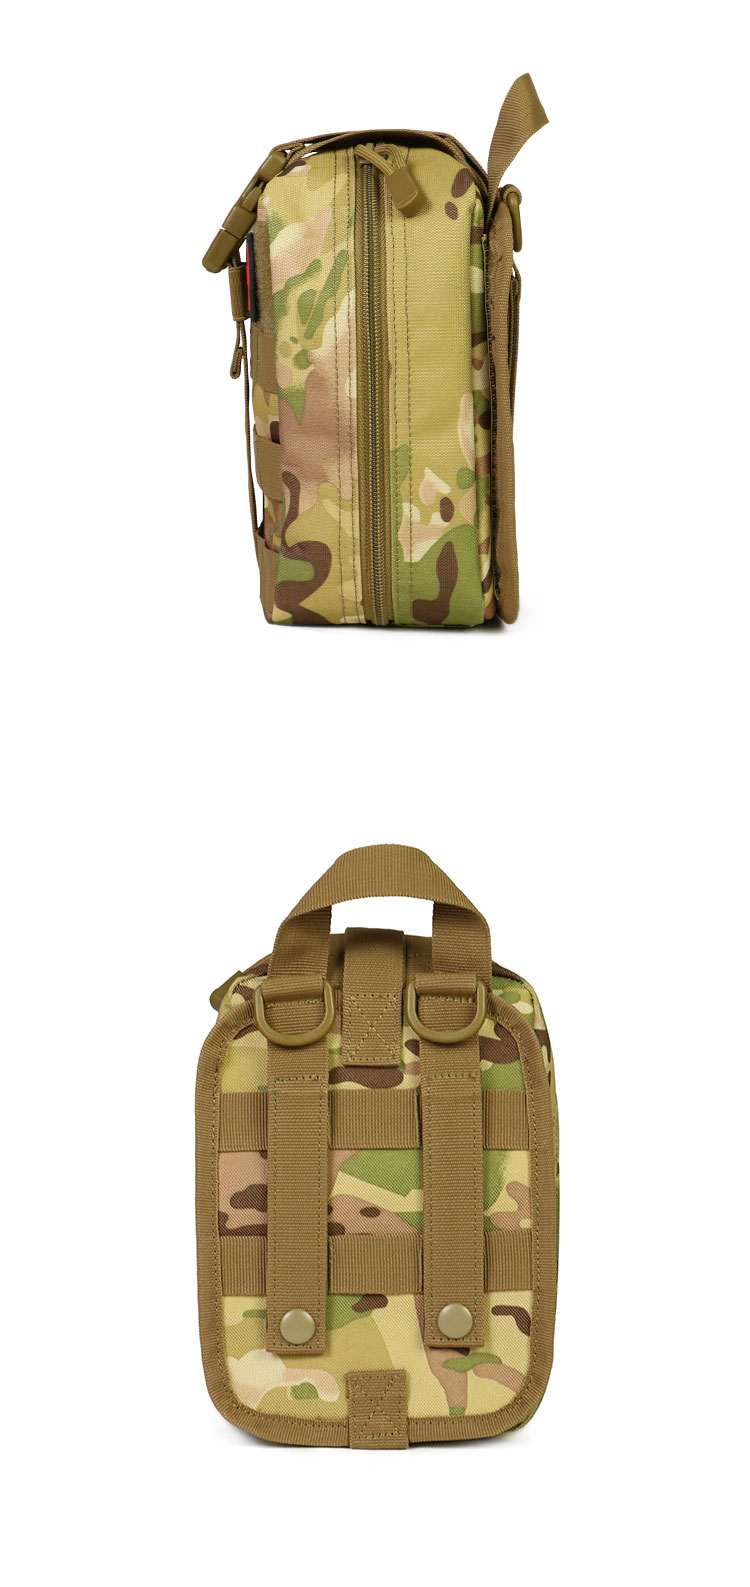 Military tactical first aid kit